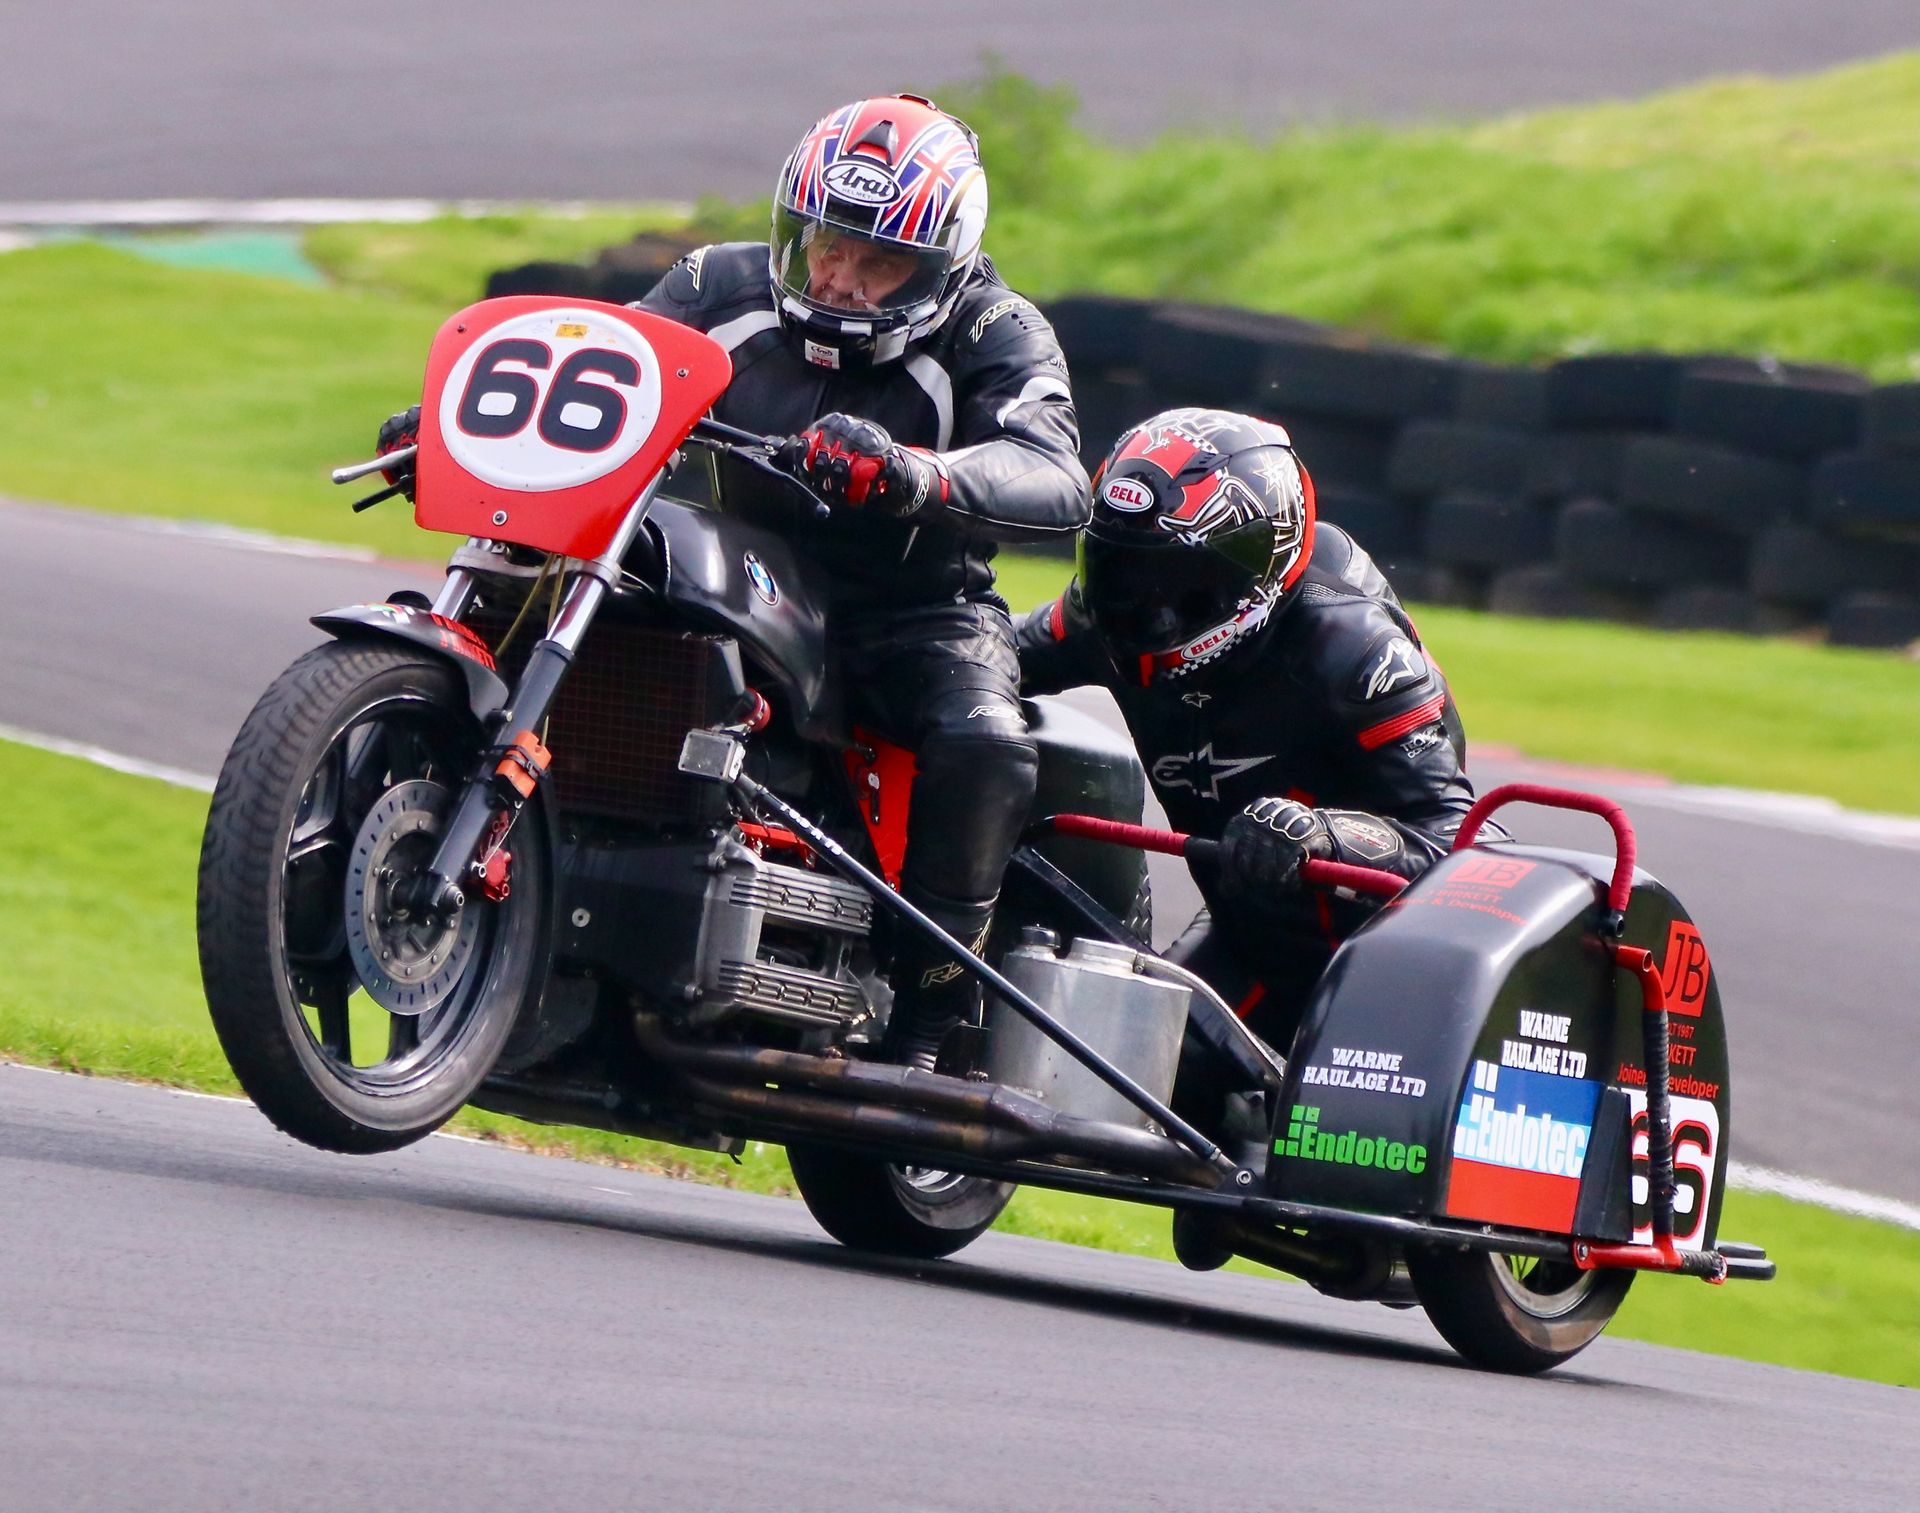 B.E.A.R.S British, European, American Racing and Supporters Sidecar Racing